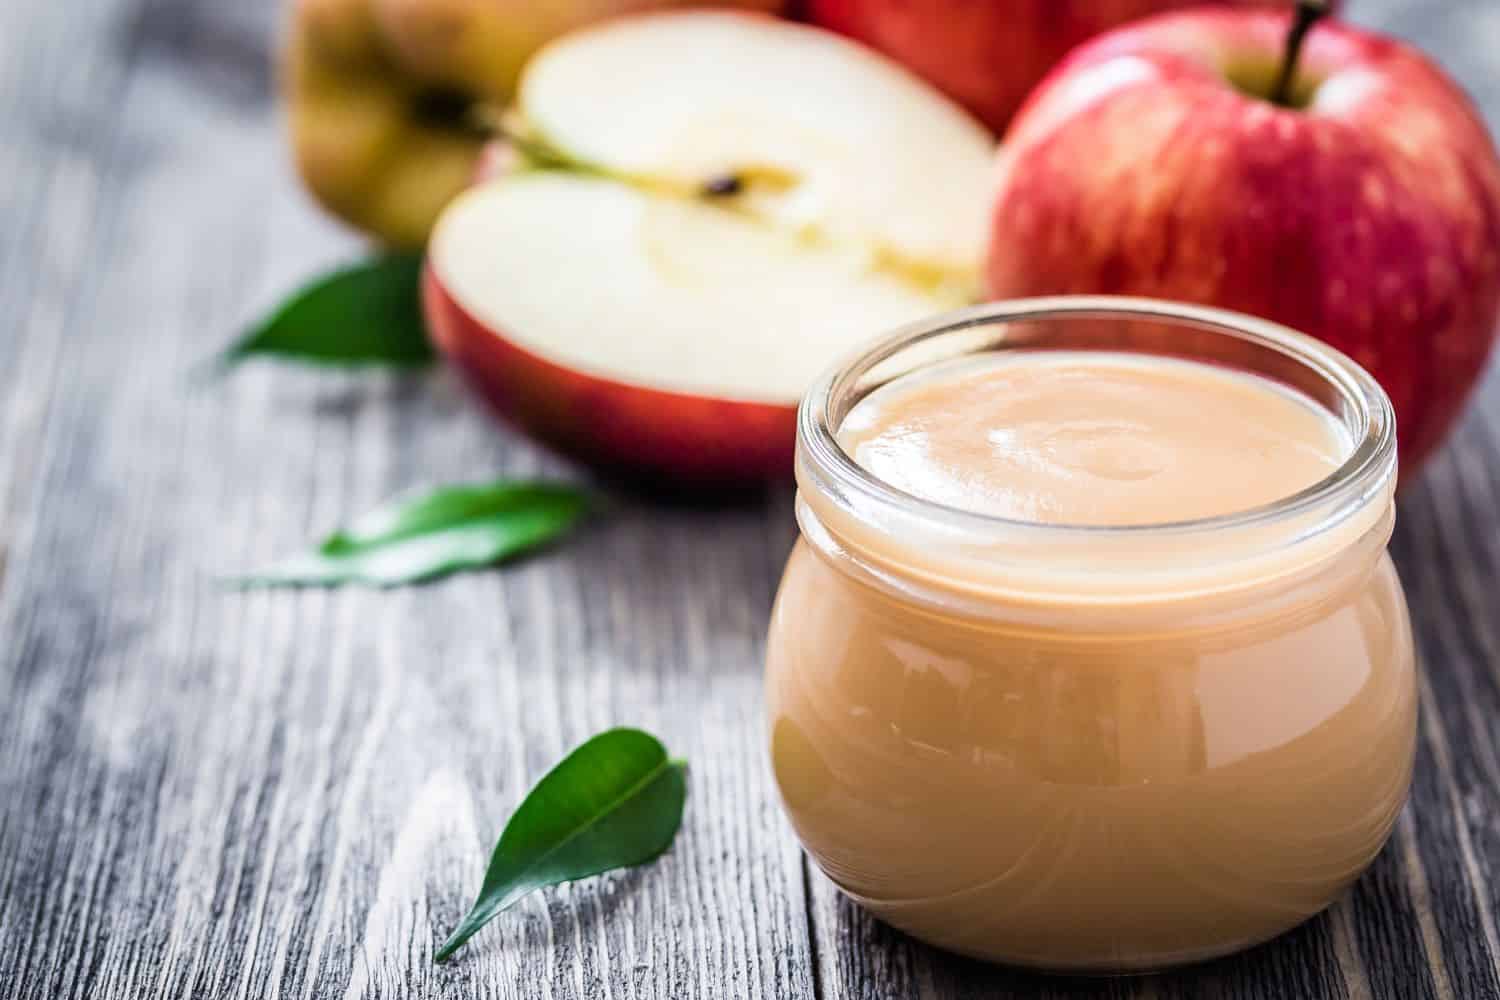 apples and canned applesauce